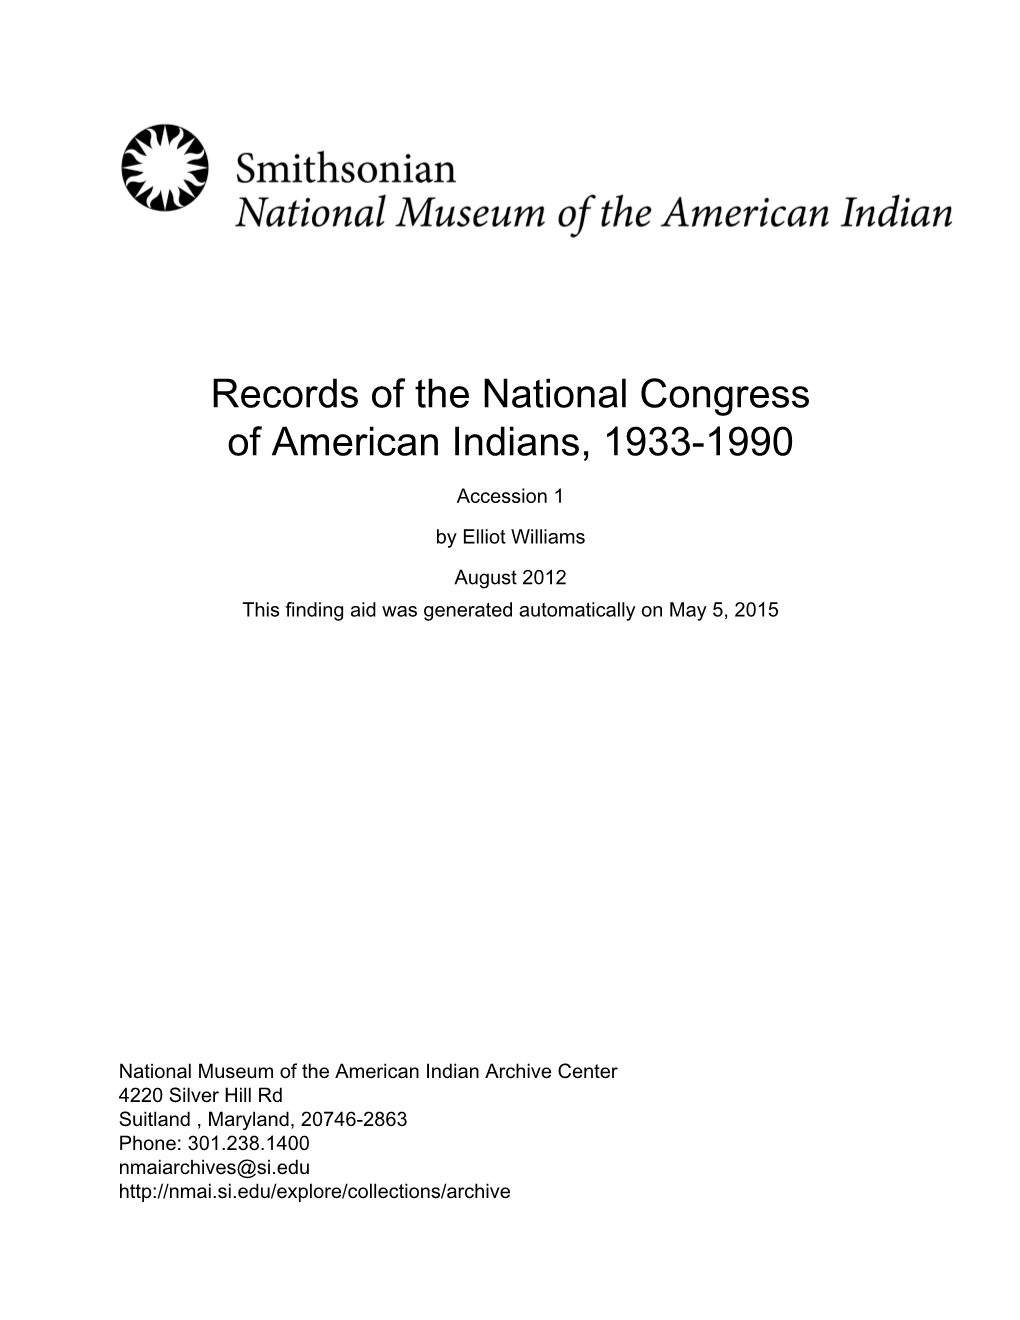 Records of the National Congress of American Indians, 1933-1990